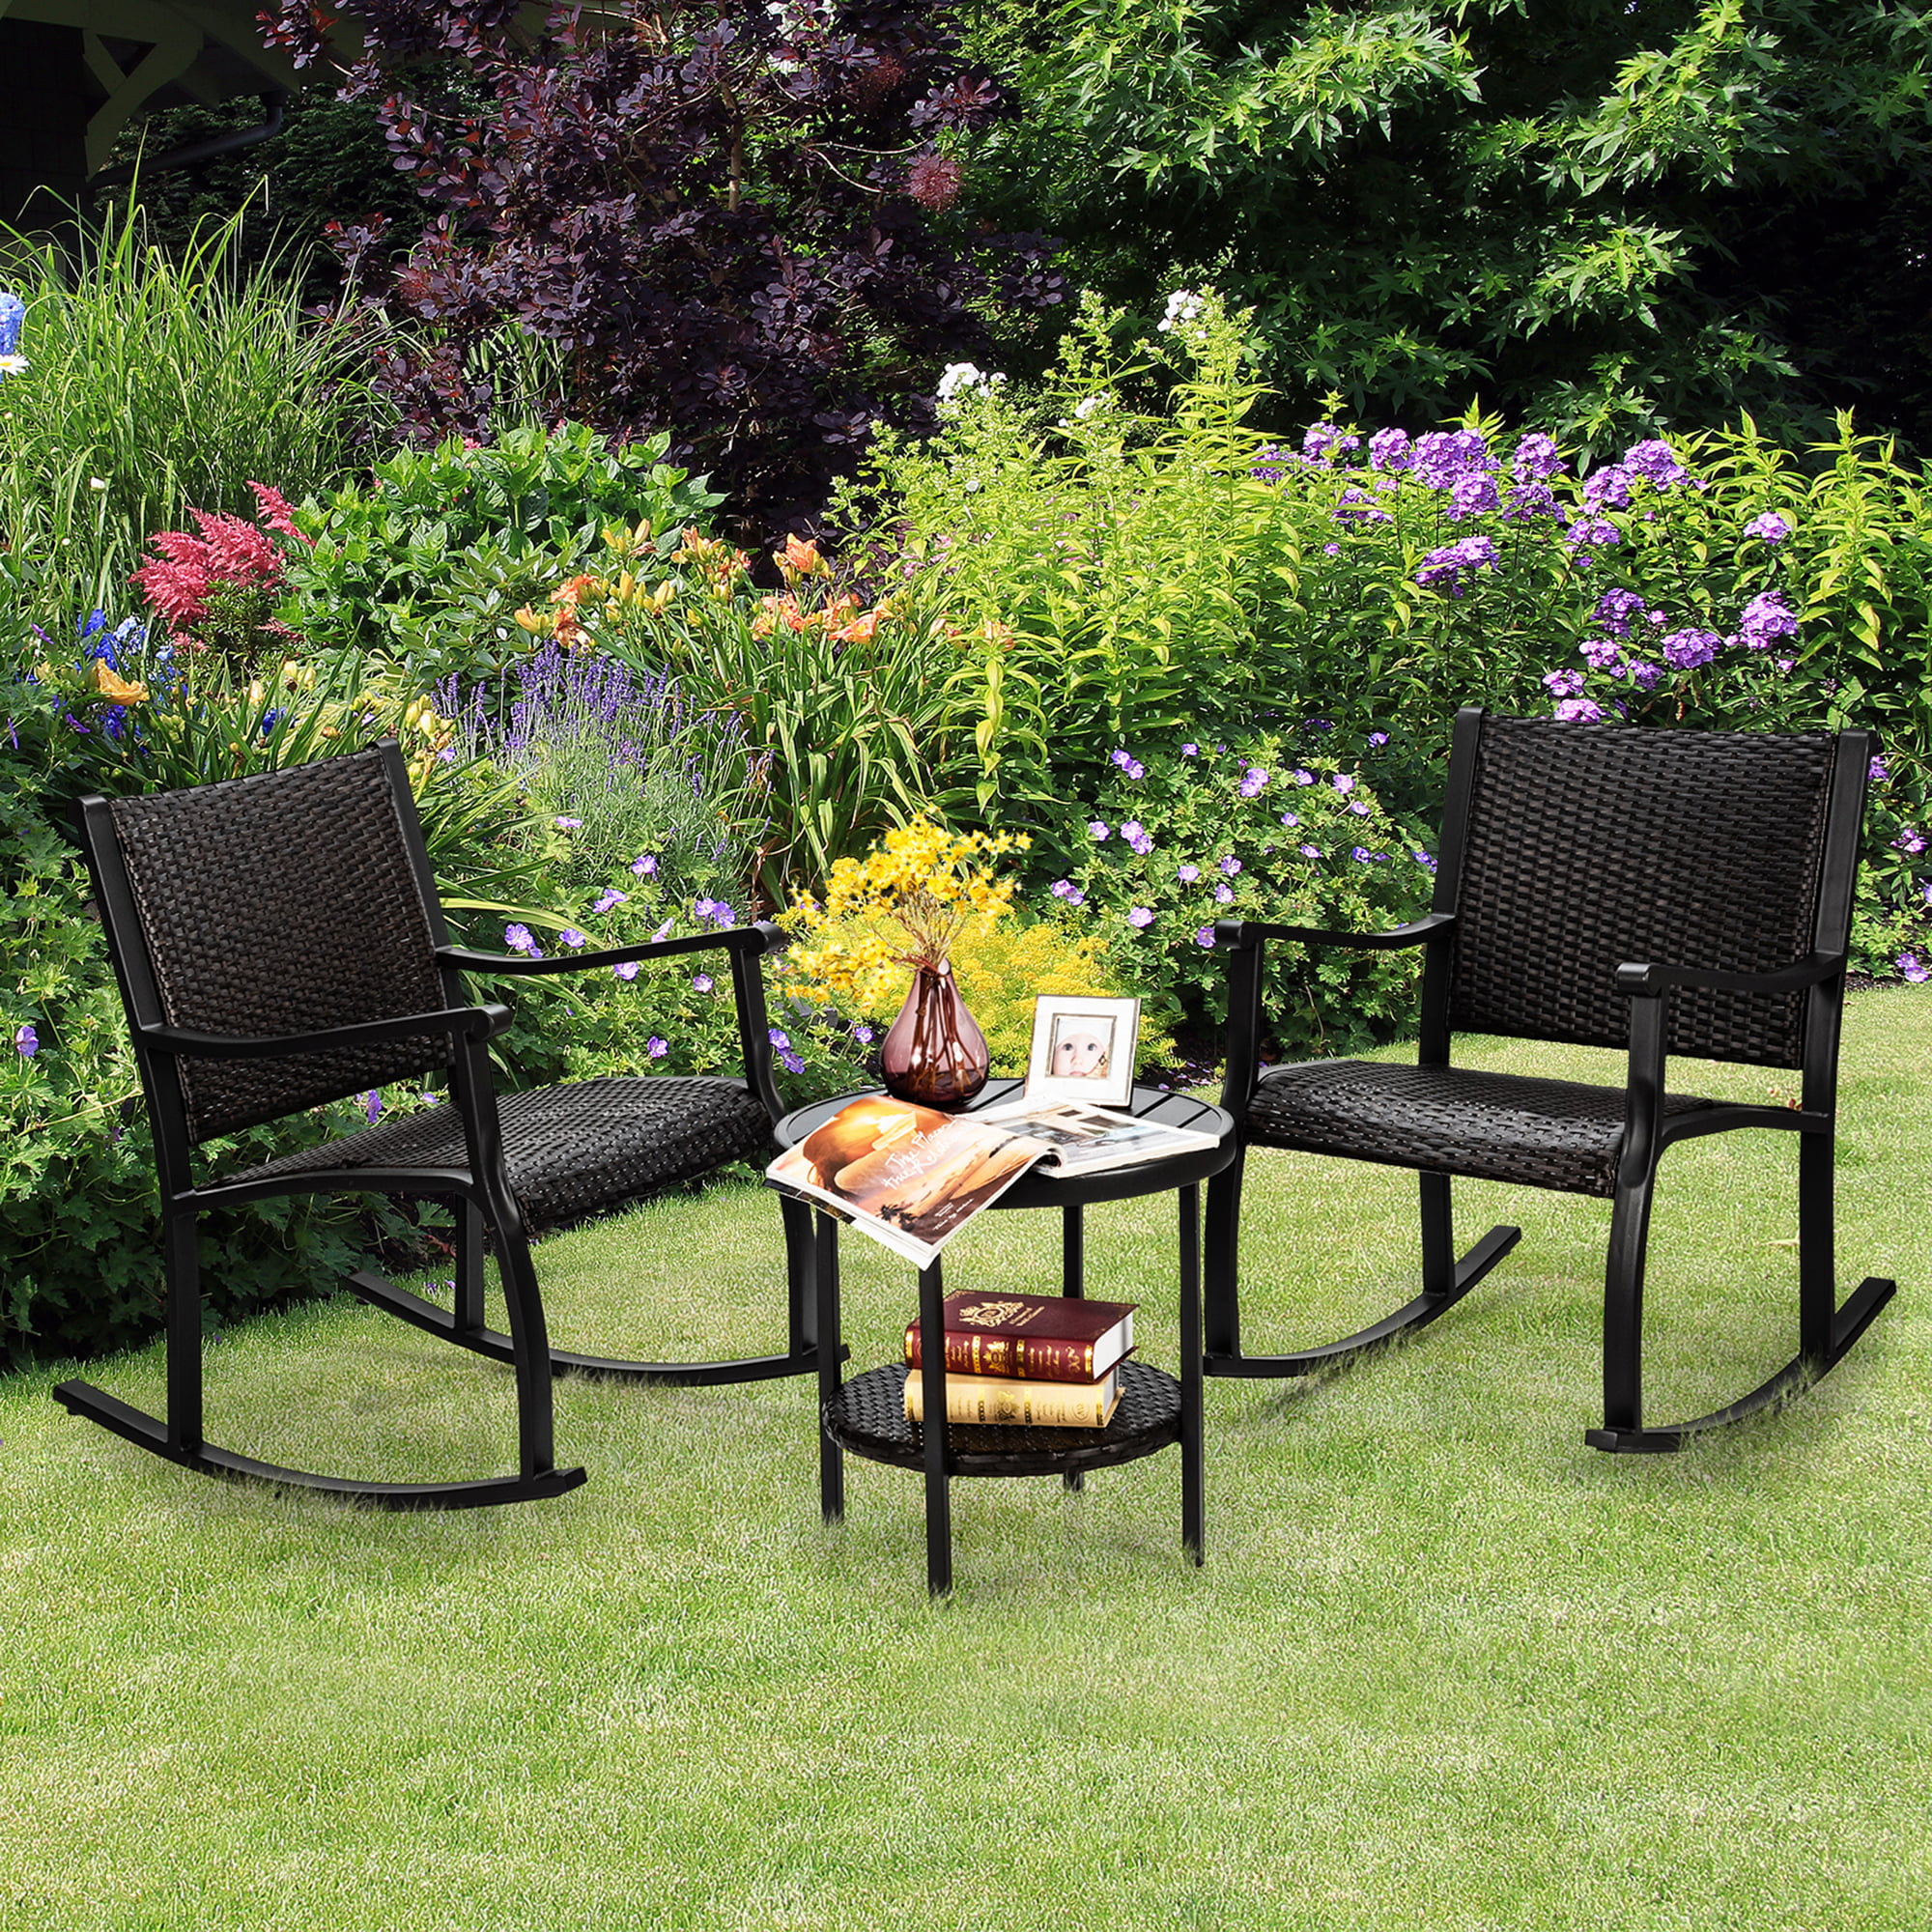 Backyard Garden Lawn Chat Set 2 Cushioned Chairs & End Table Outdoor Wicker Rattan Conversation Set Tangkula 3 Piece Patio Furniture Set Chill Time Modern Outdoor Furniture 